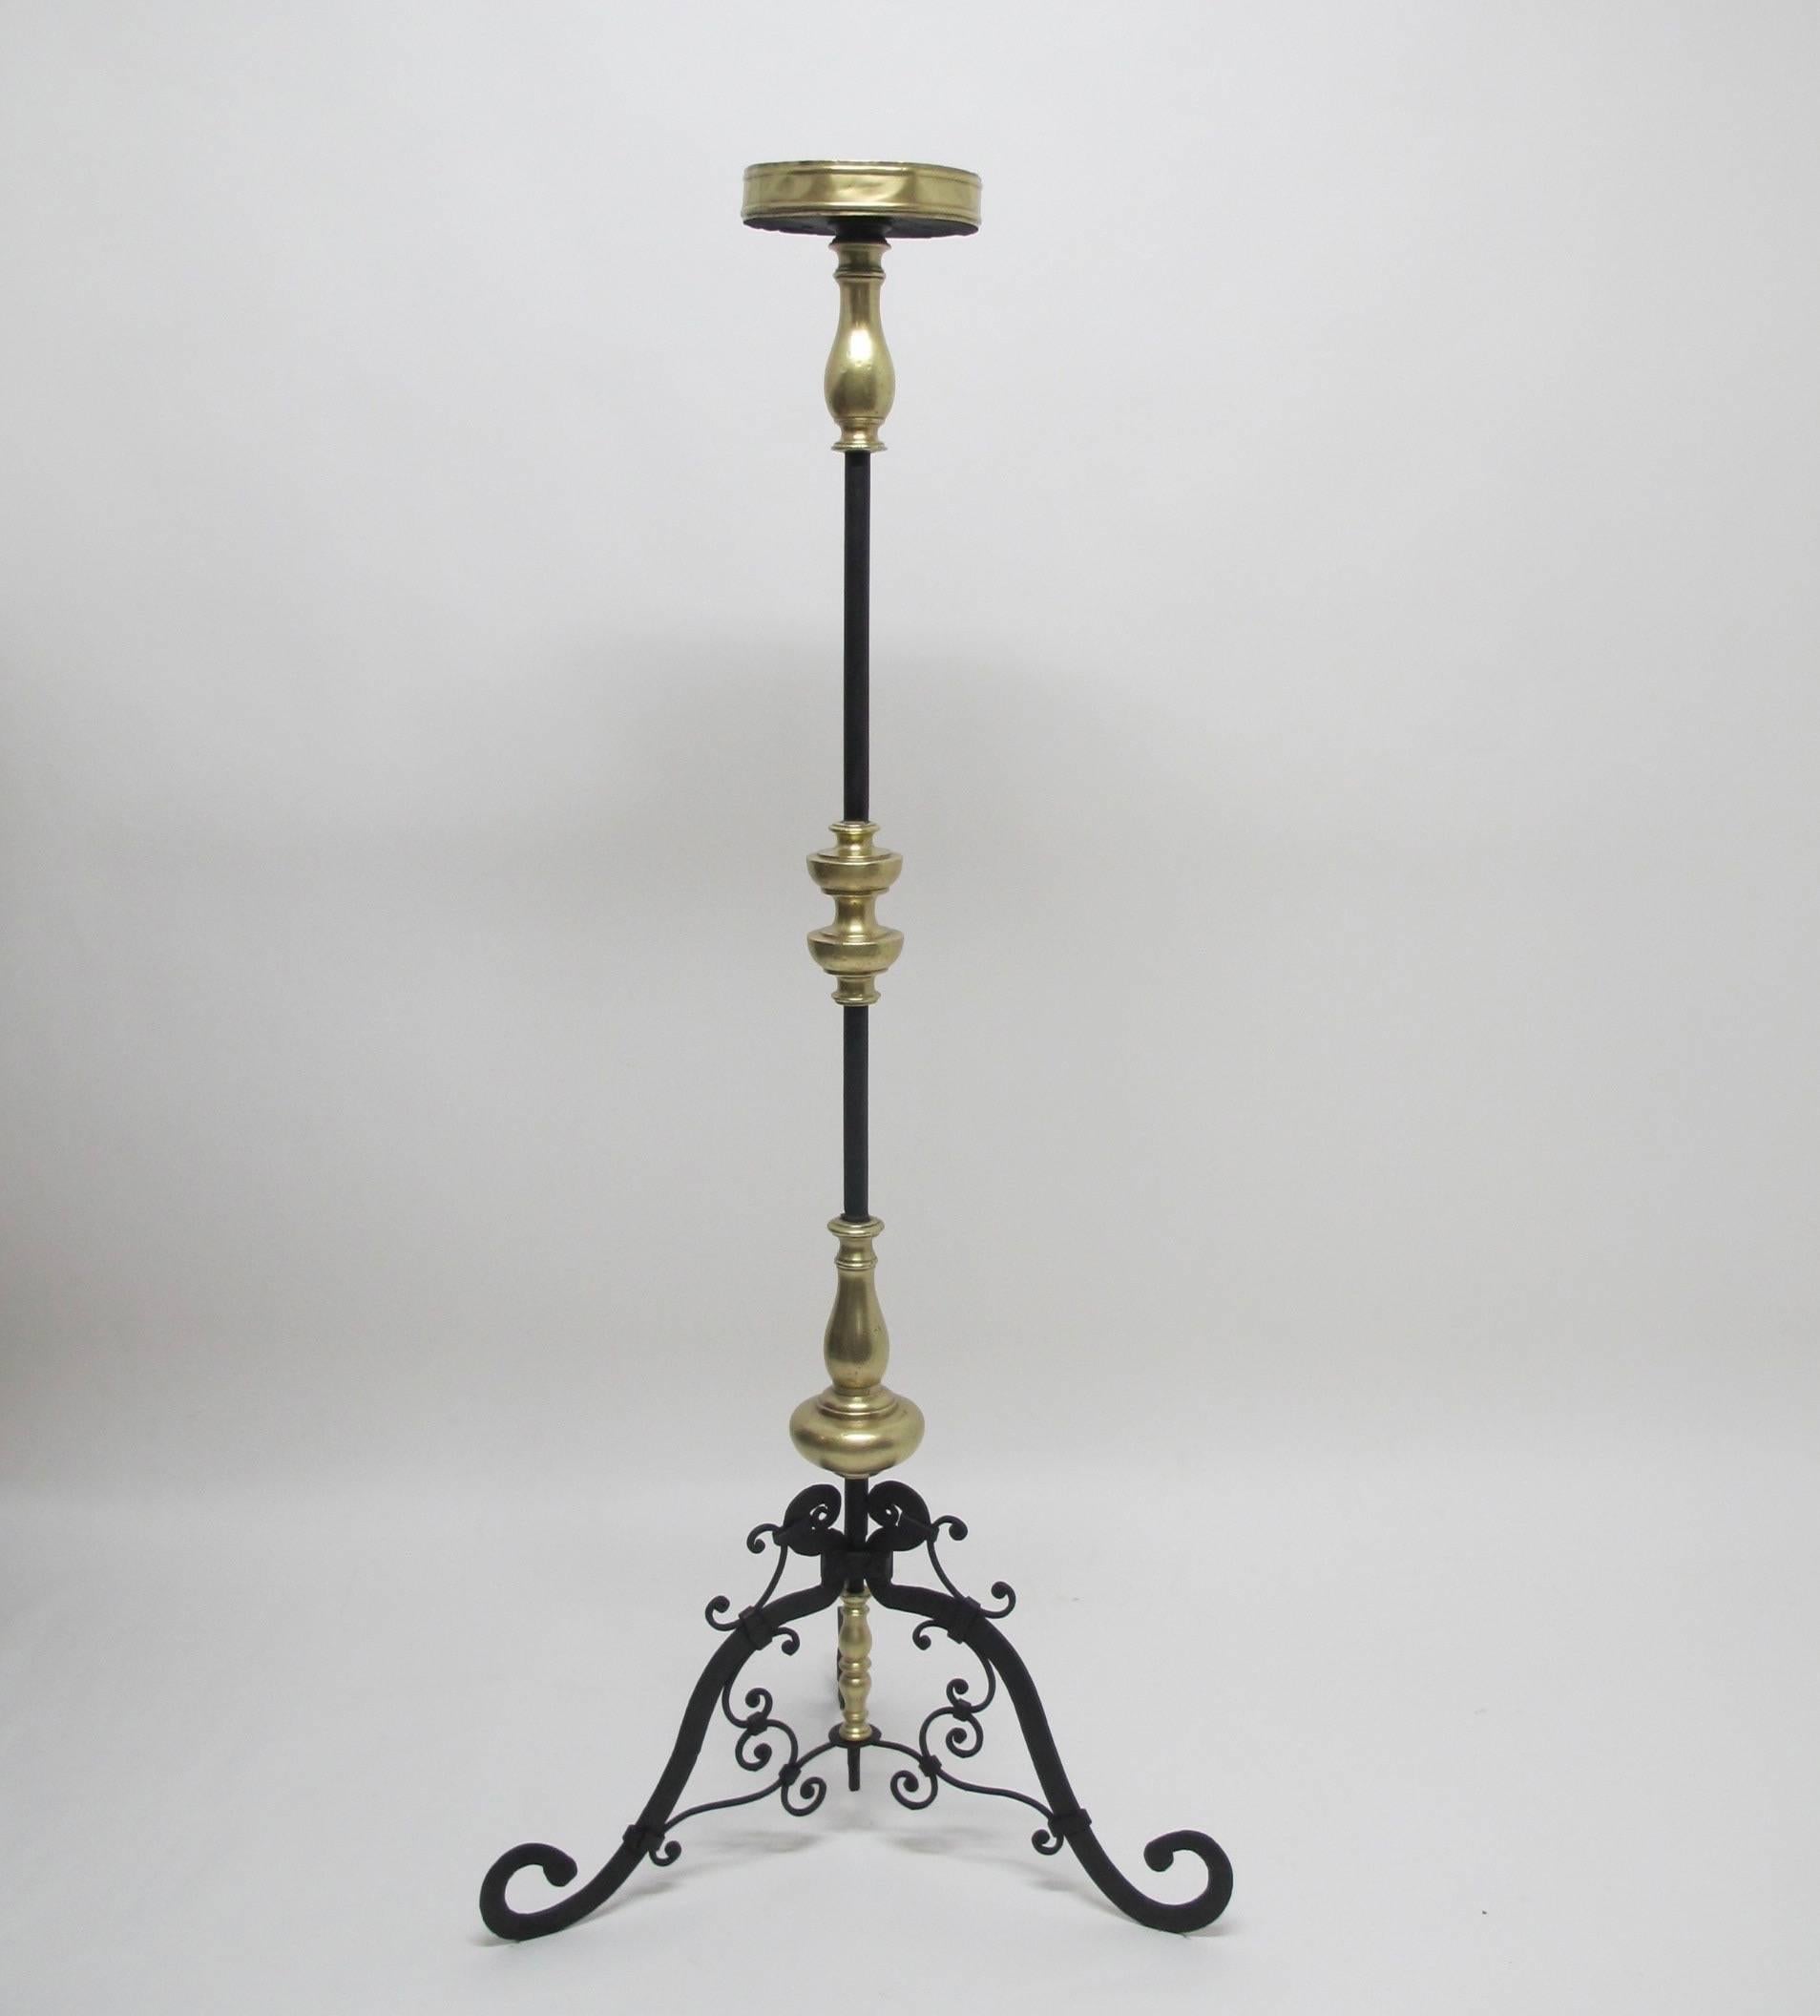 Brass and wrought iron candle torchiere standing on three splayed legs with scrolling accents. Italy, 17th century.